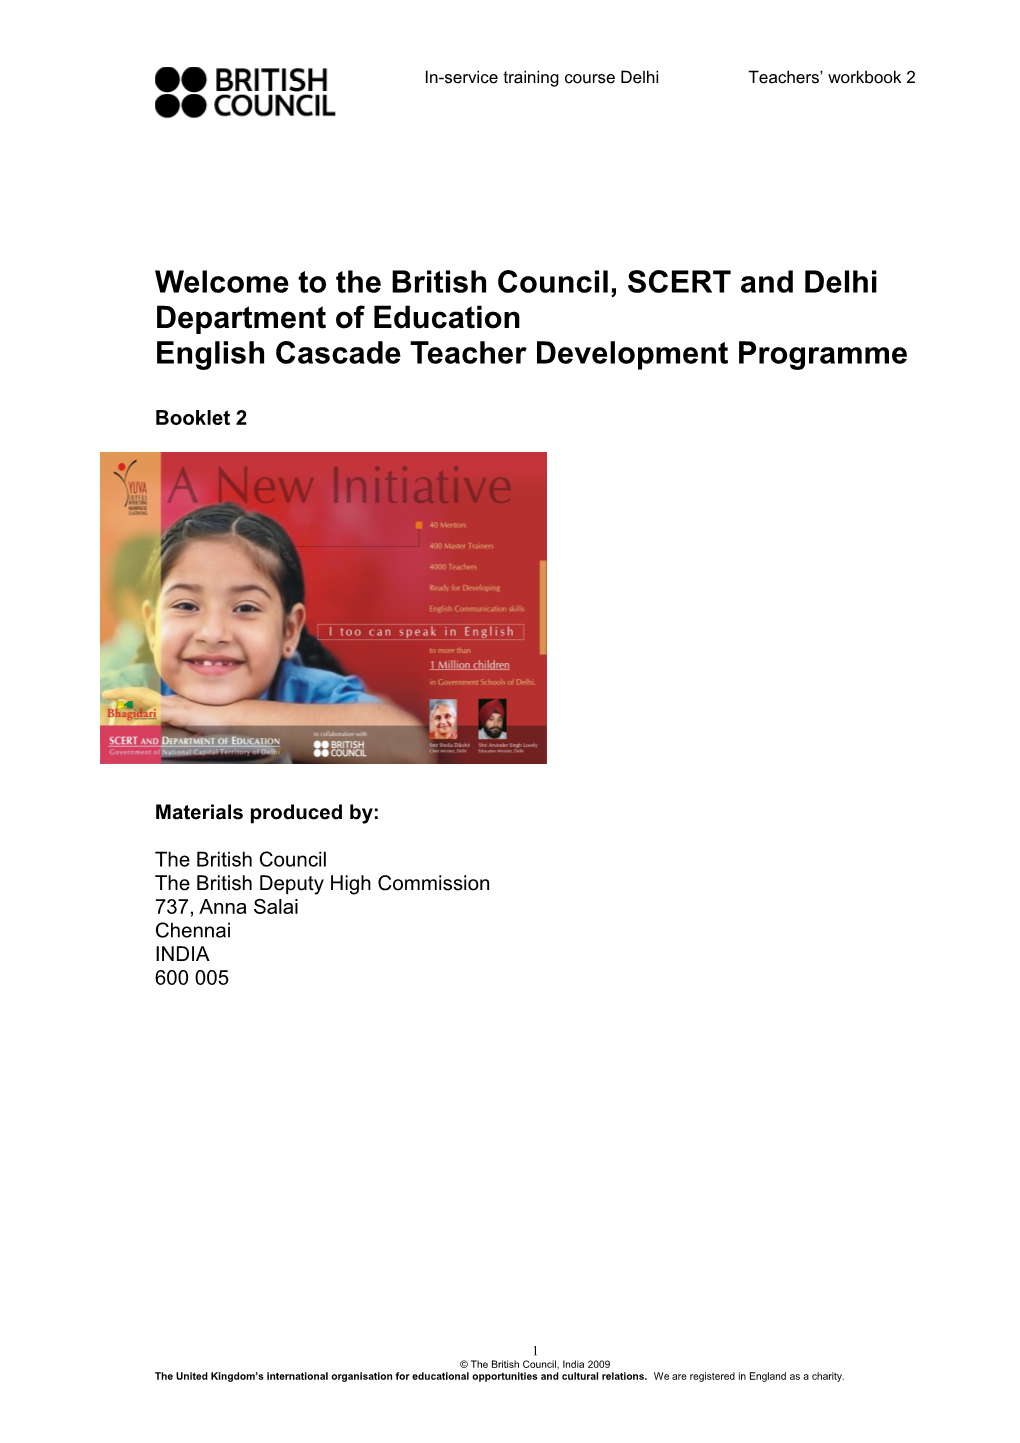 Welcome to the British Counci L, SCERT and Delhi Department of Education